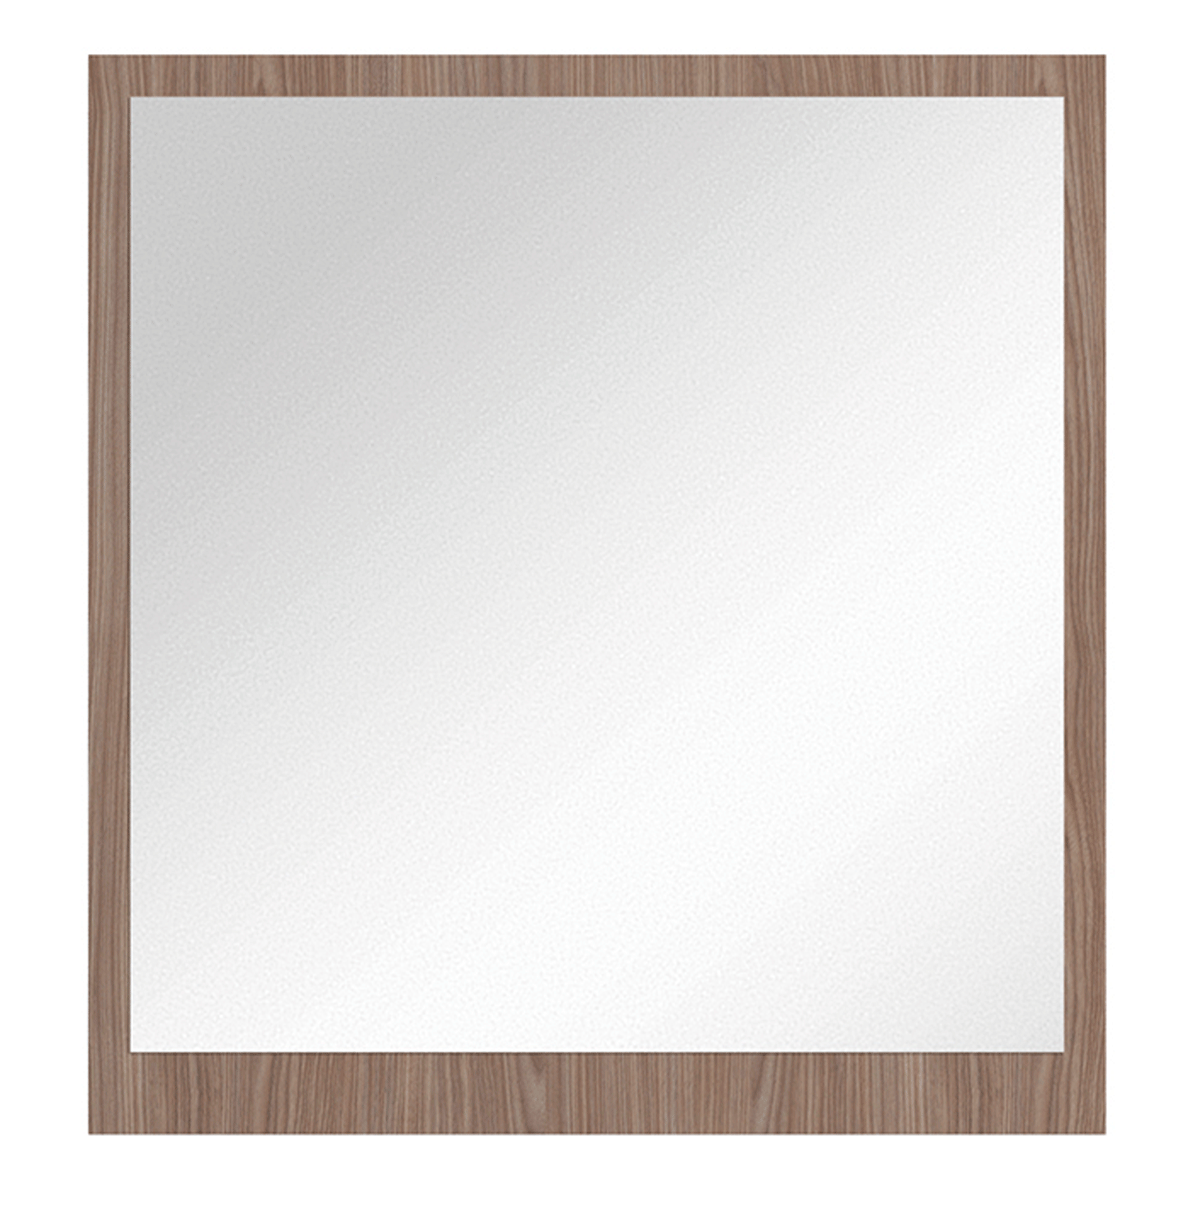 Brands Status Modern Collections, Italy Nora mirror